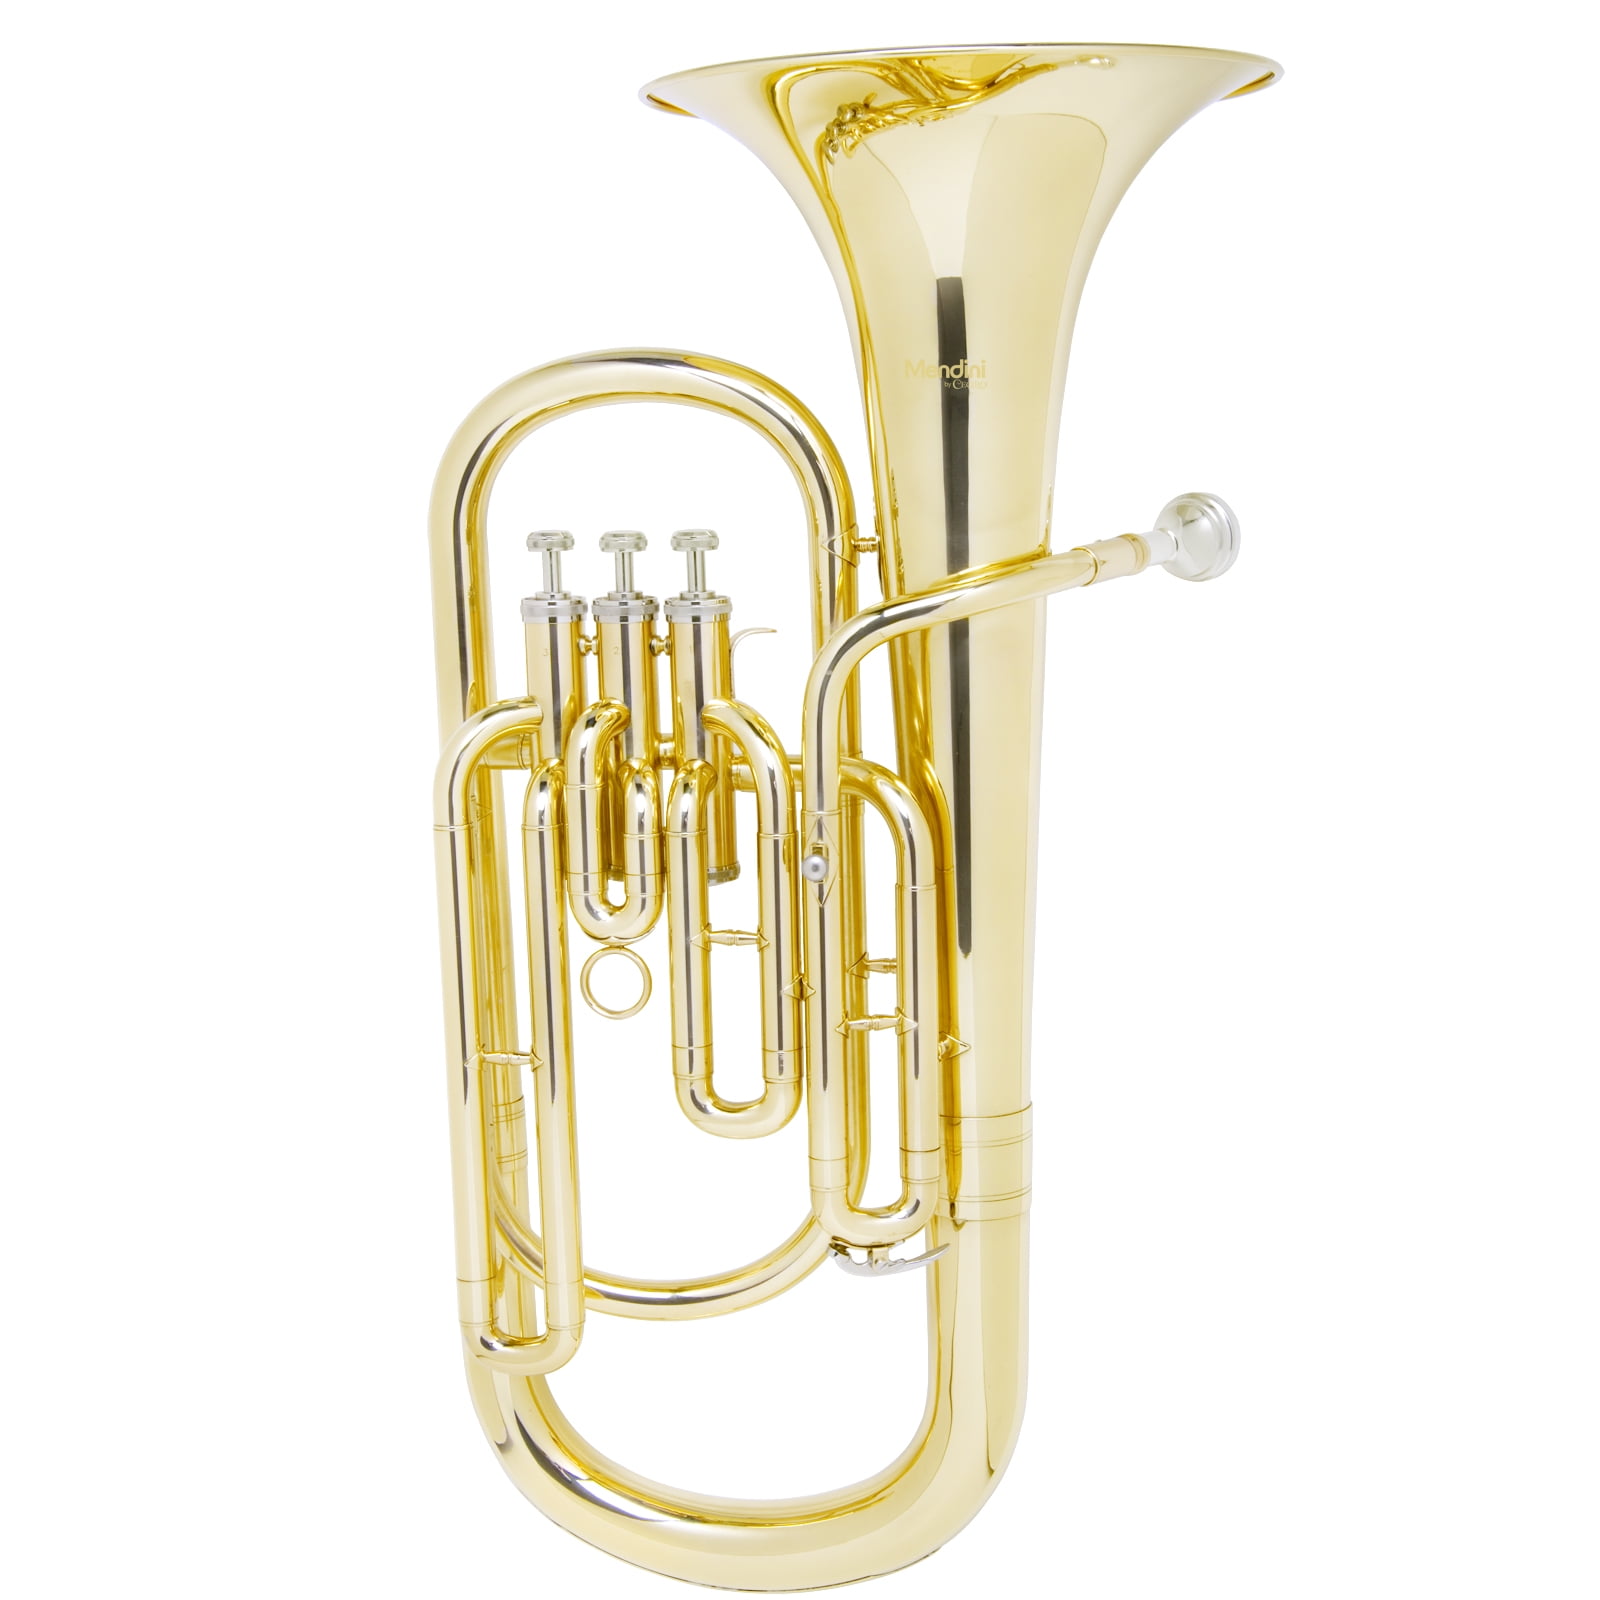 Mendini MBR-20 Bb Baritone with Stainless Steel Pistons, Tuner and Deluxe  Case, Gold